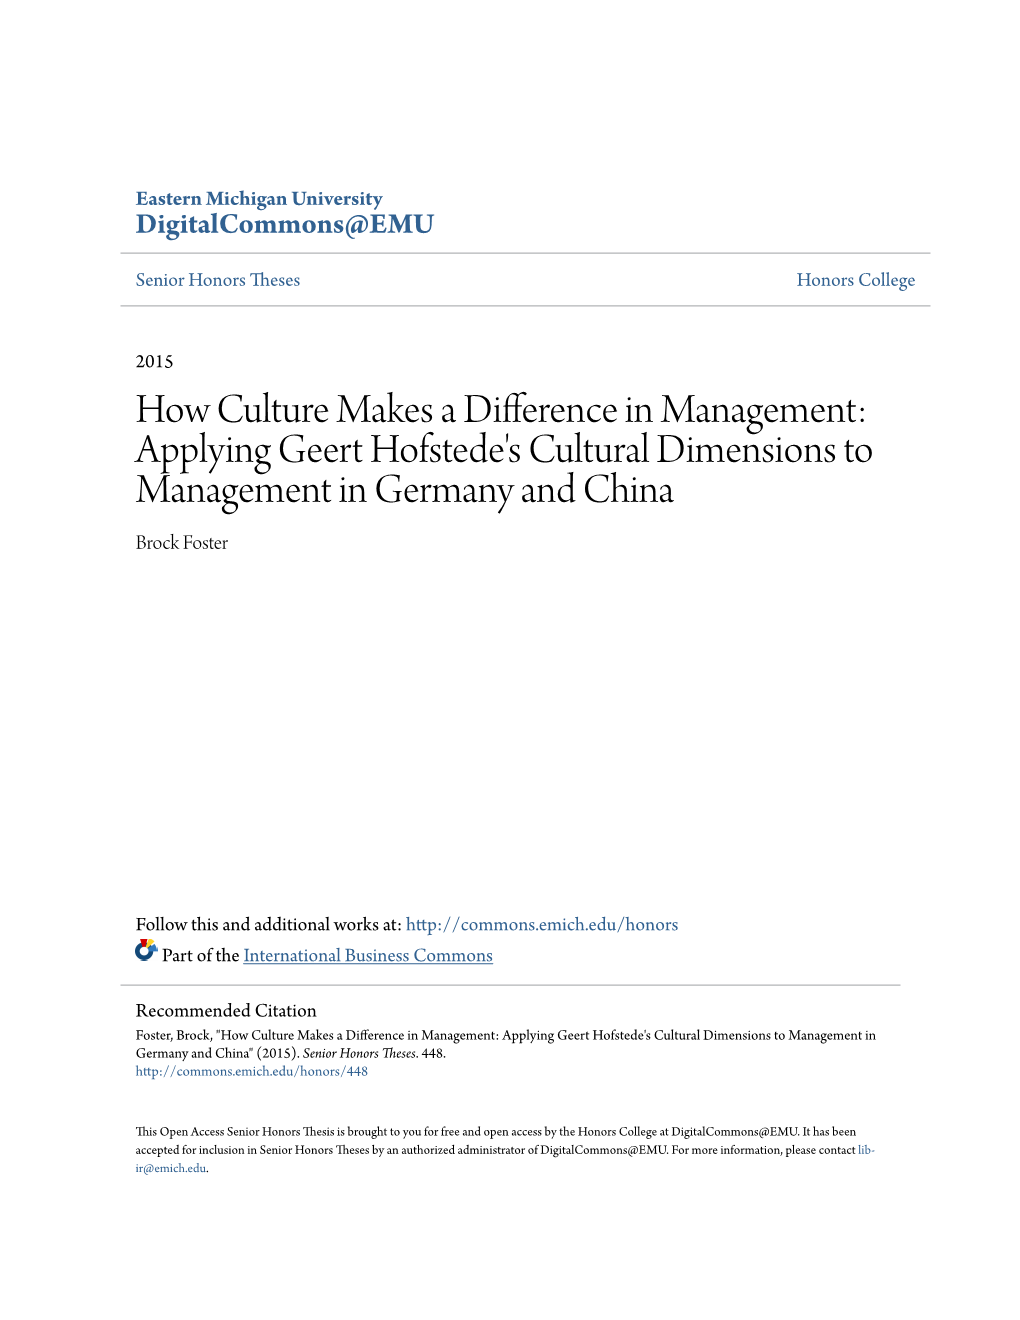 Applying Geert Hofstede's Cultural Dimensions to Management in Germany and China Brock Foster